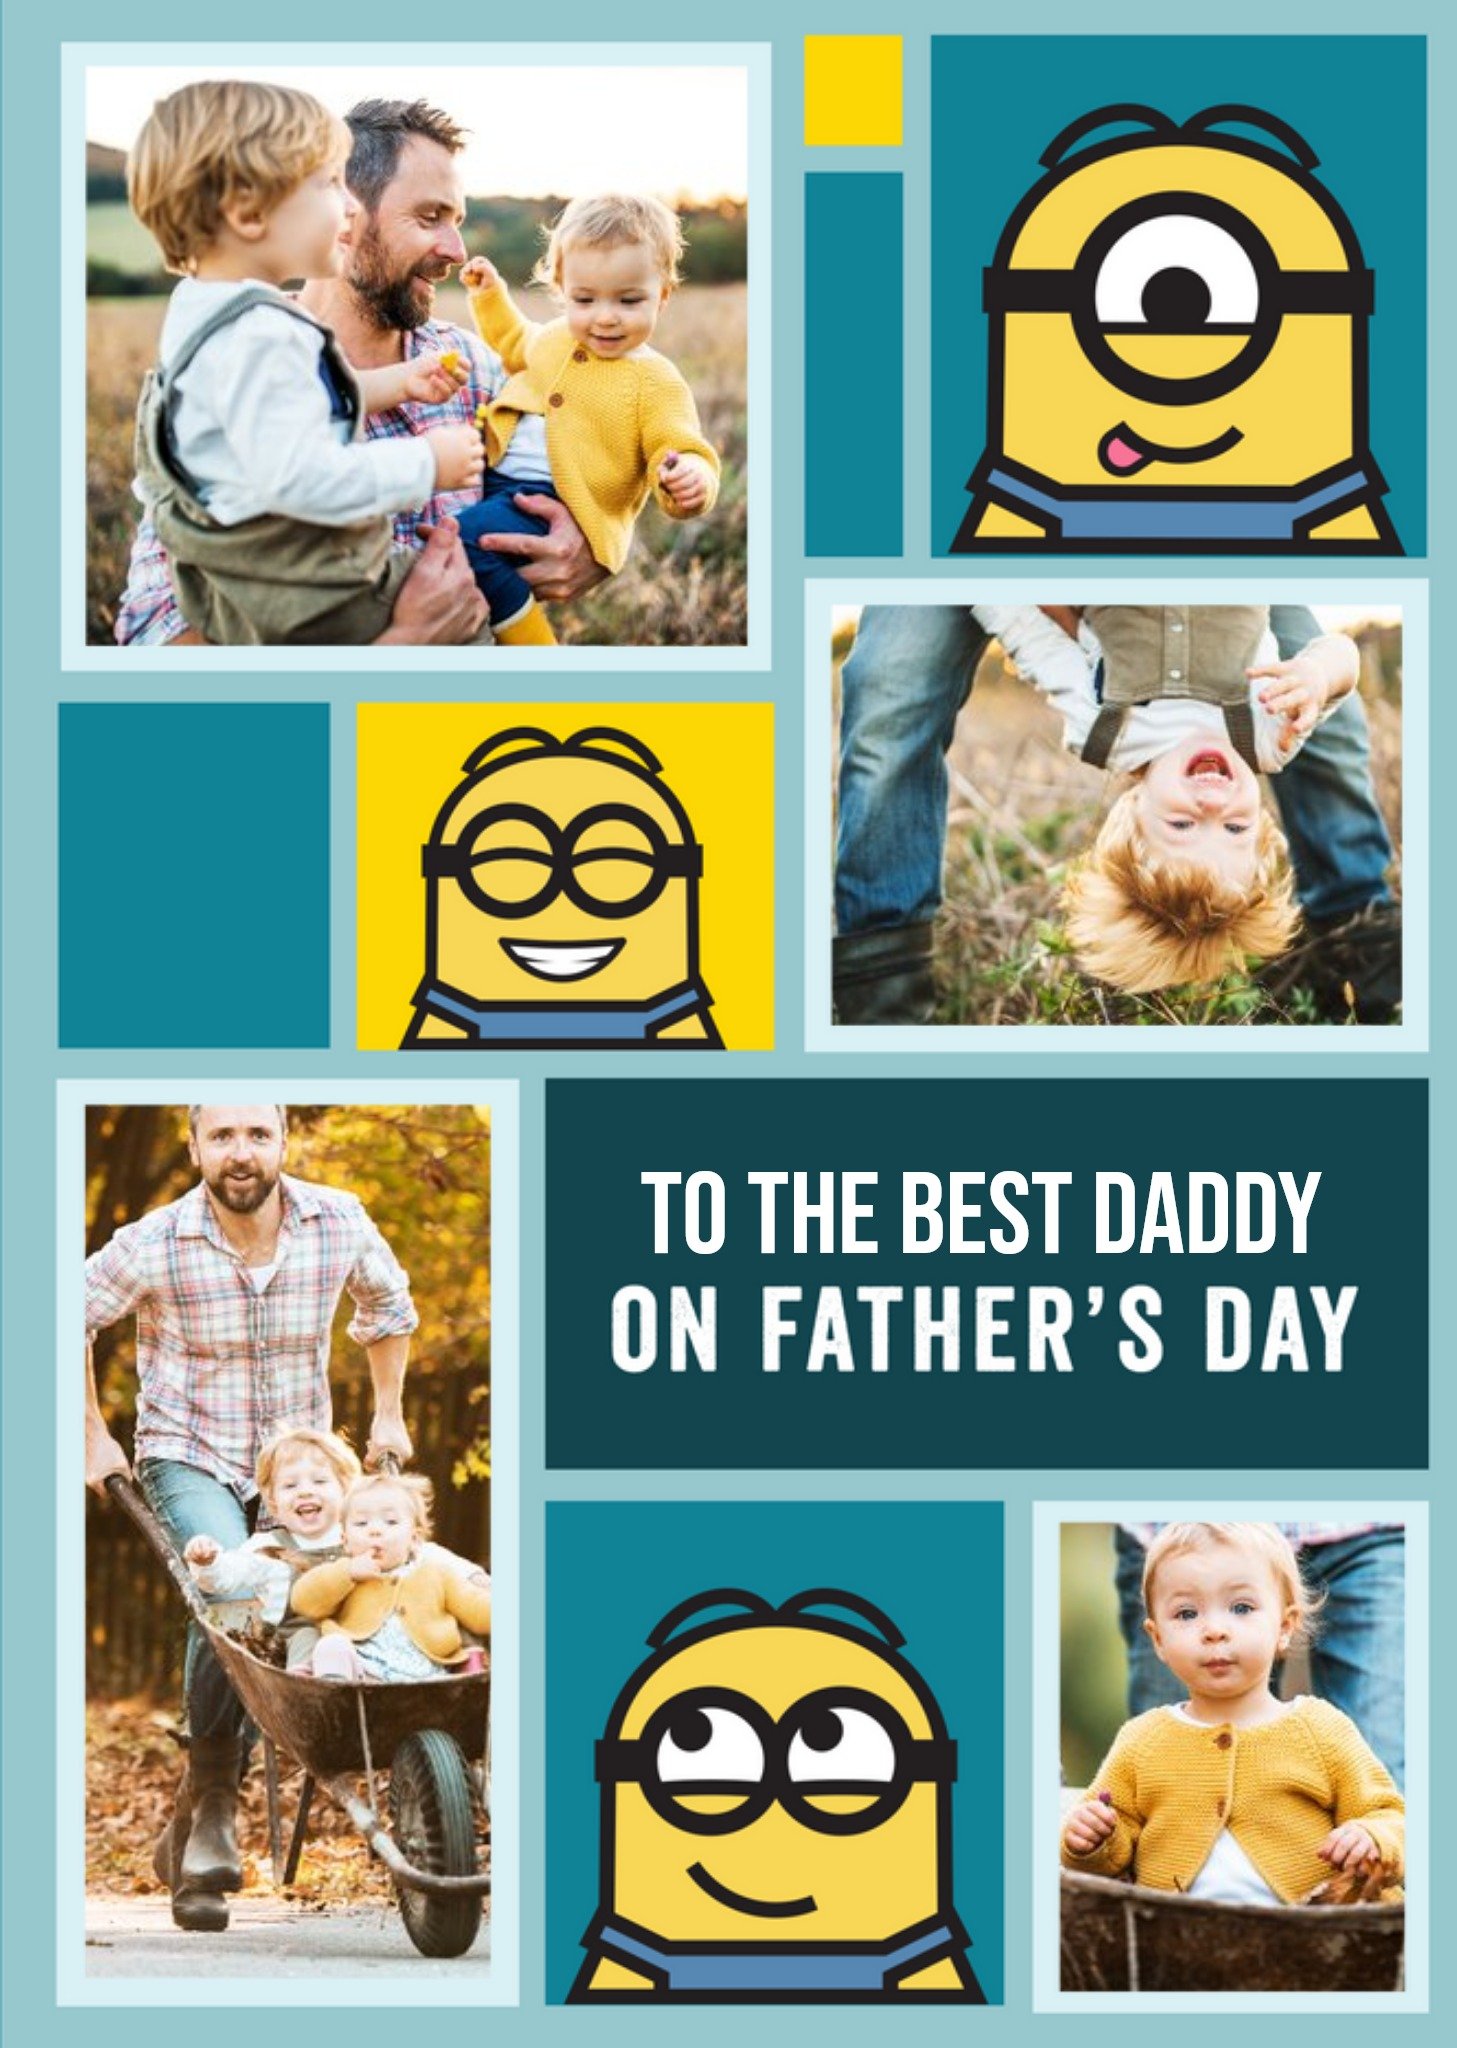 Despicable Me Minions Best Daddy Photo Upload Father's Day Card, Large